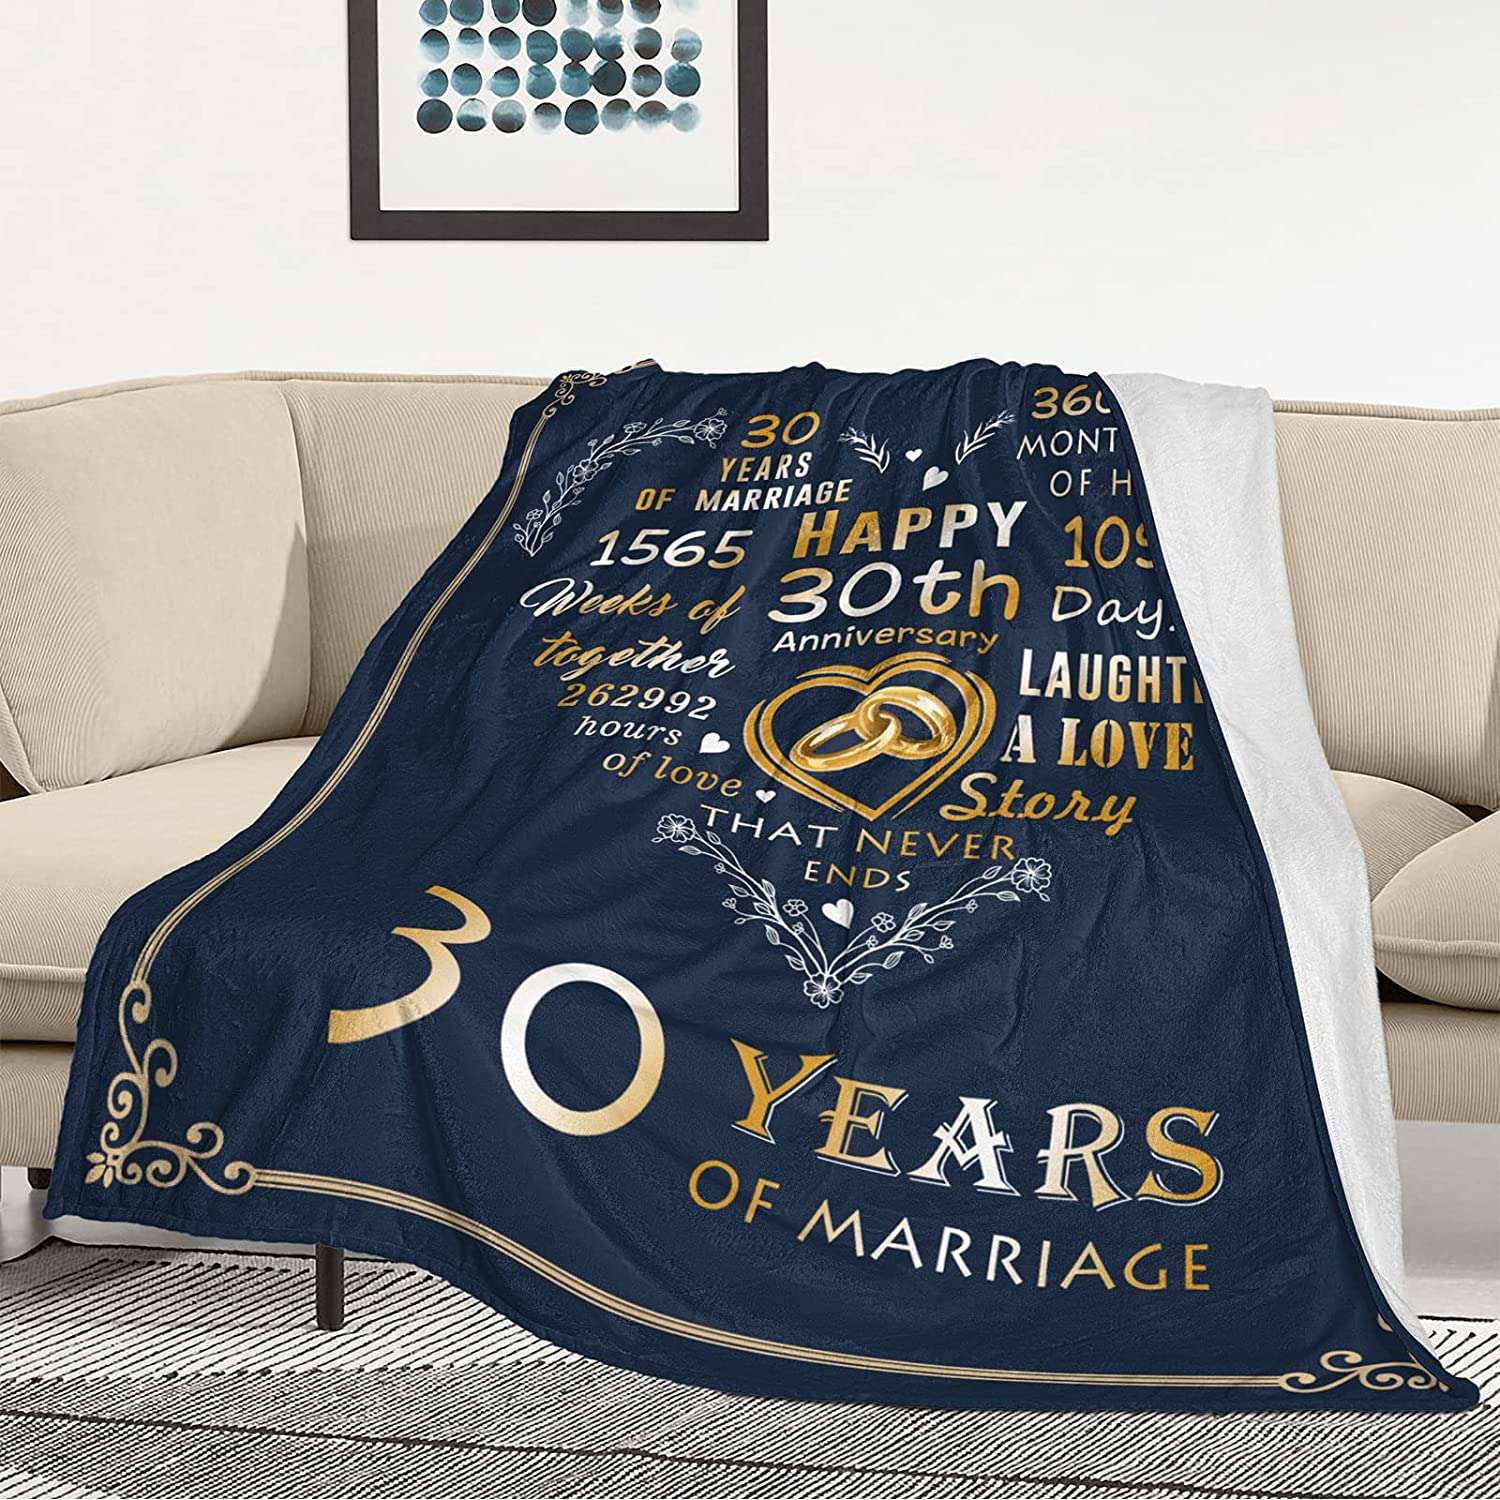 30th Pearl Wedding Anniversary Couple Gifts A Love Story Blanket